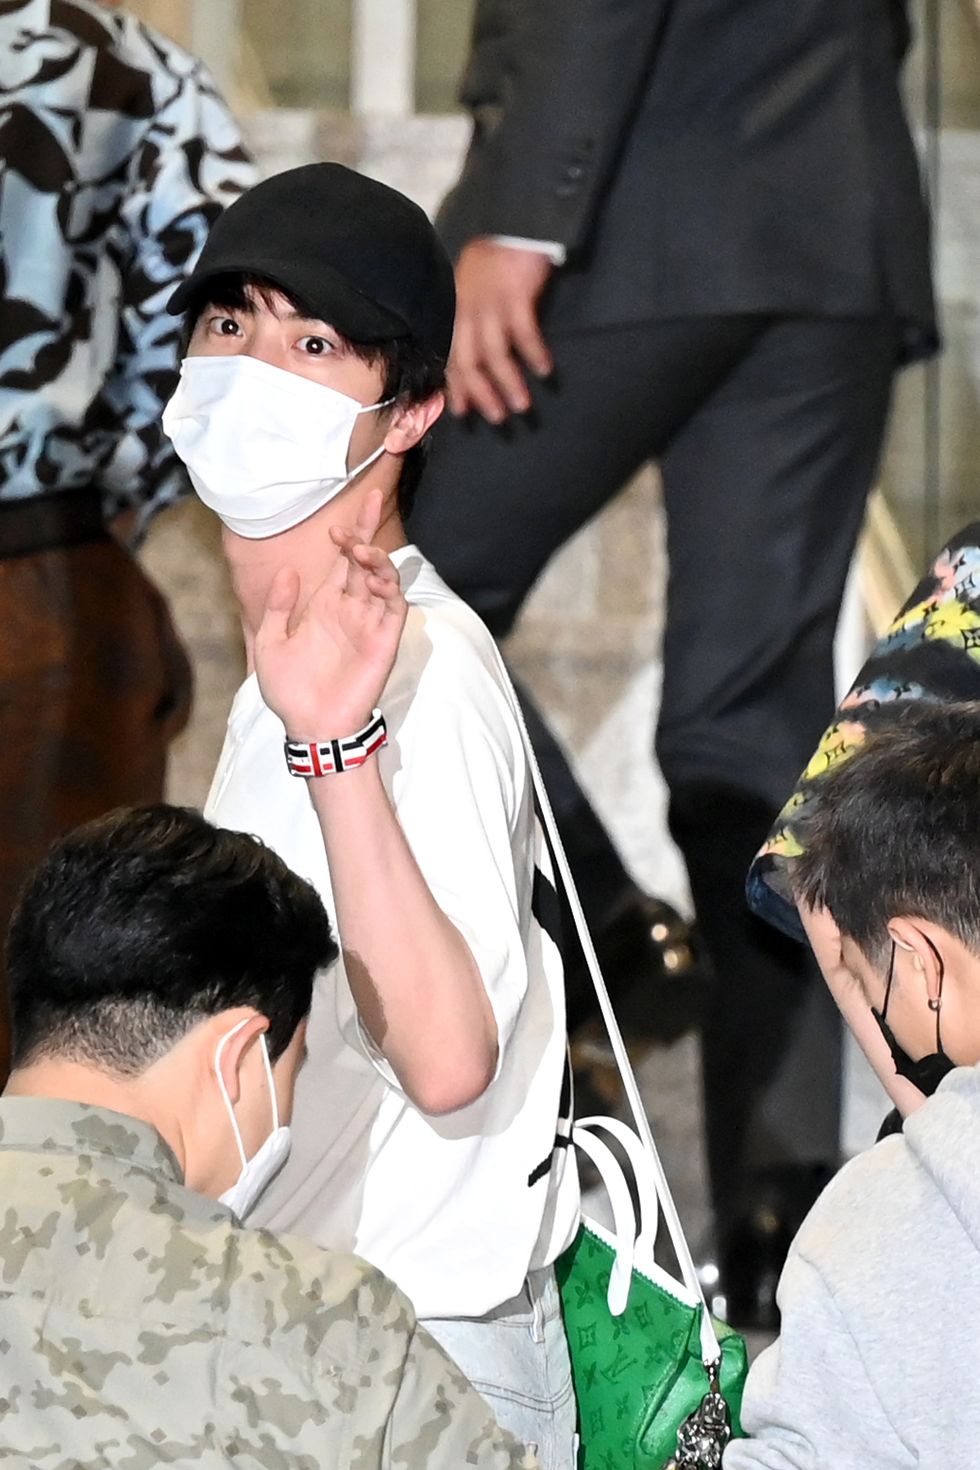 bts jin arrives at incheon international airport to depart for attends 'united nations general assembly’ in new york on september 18th in seoul, south korea photoosen